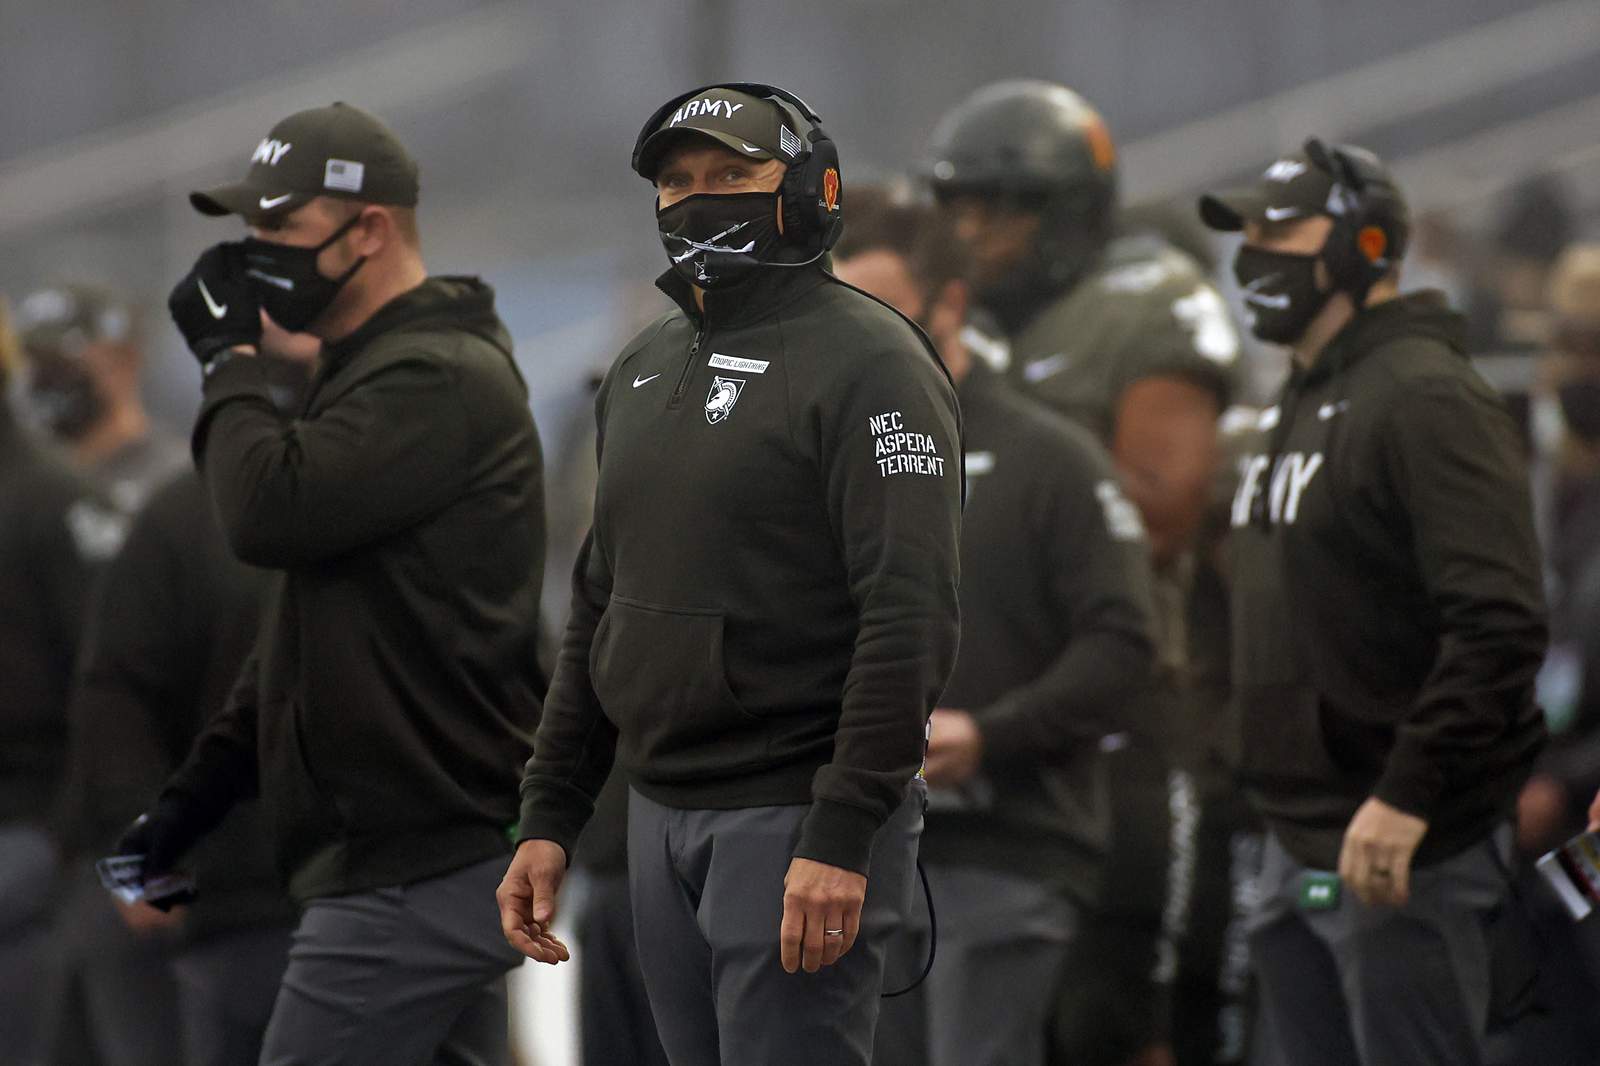 Army left out in Bowl Day marred by cancellations, opt outs